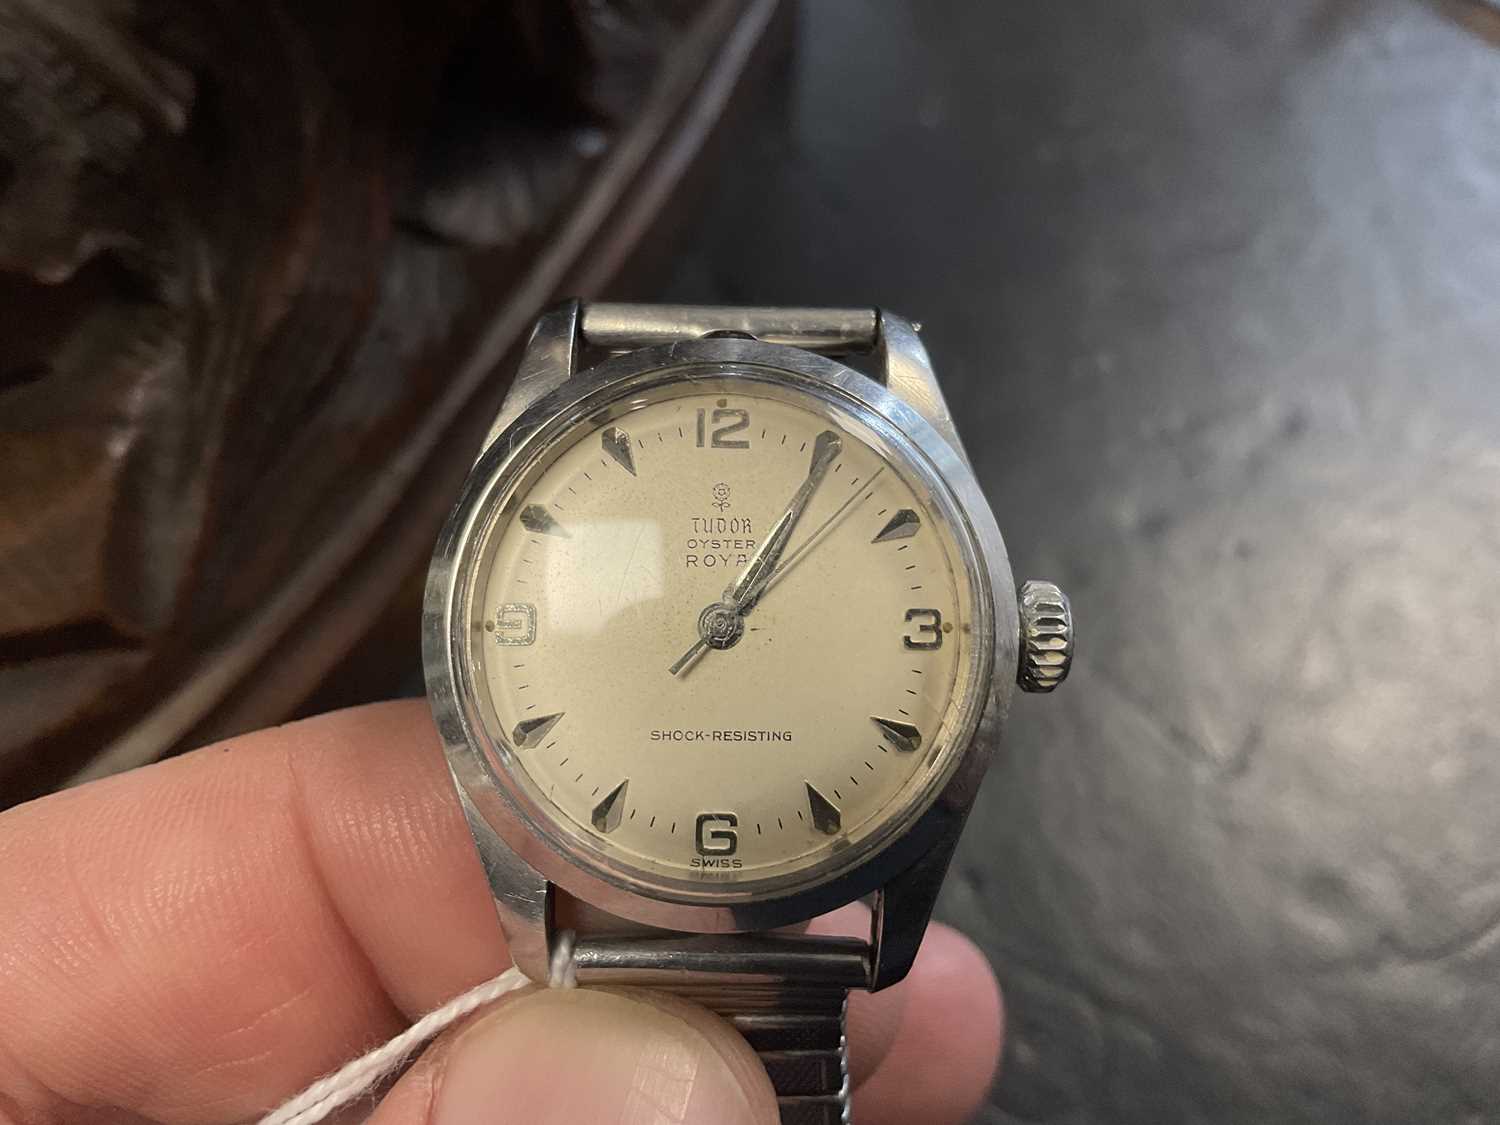 A GENTLEMAN'S 1950's STEEL TUDOR OYSTER ROYAL MANUAL WRIST WATCH - Image 5 of 5